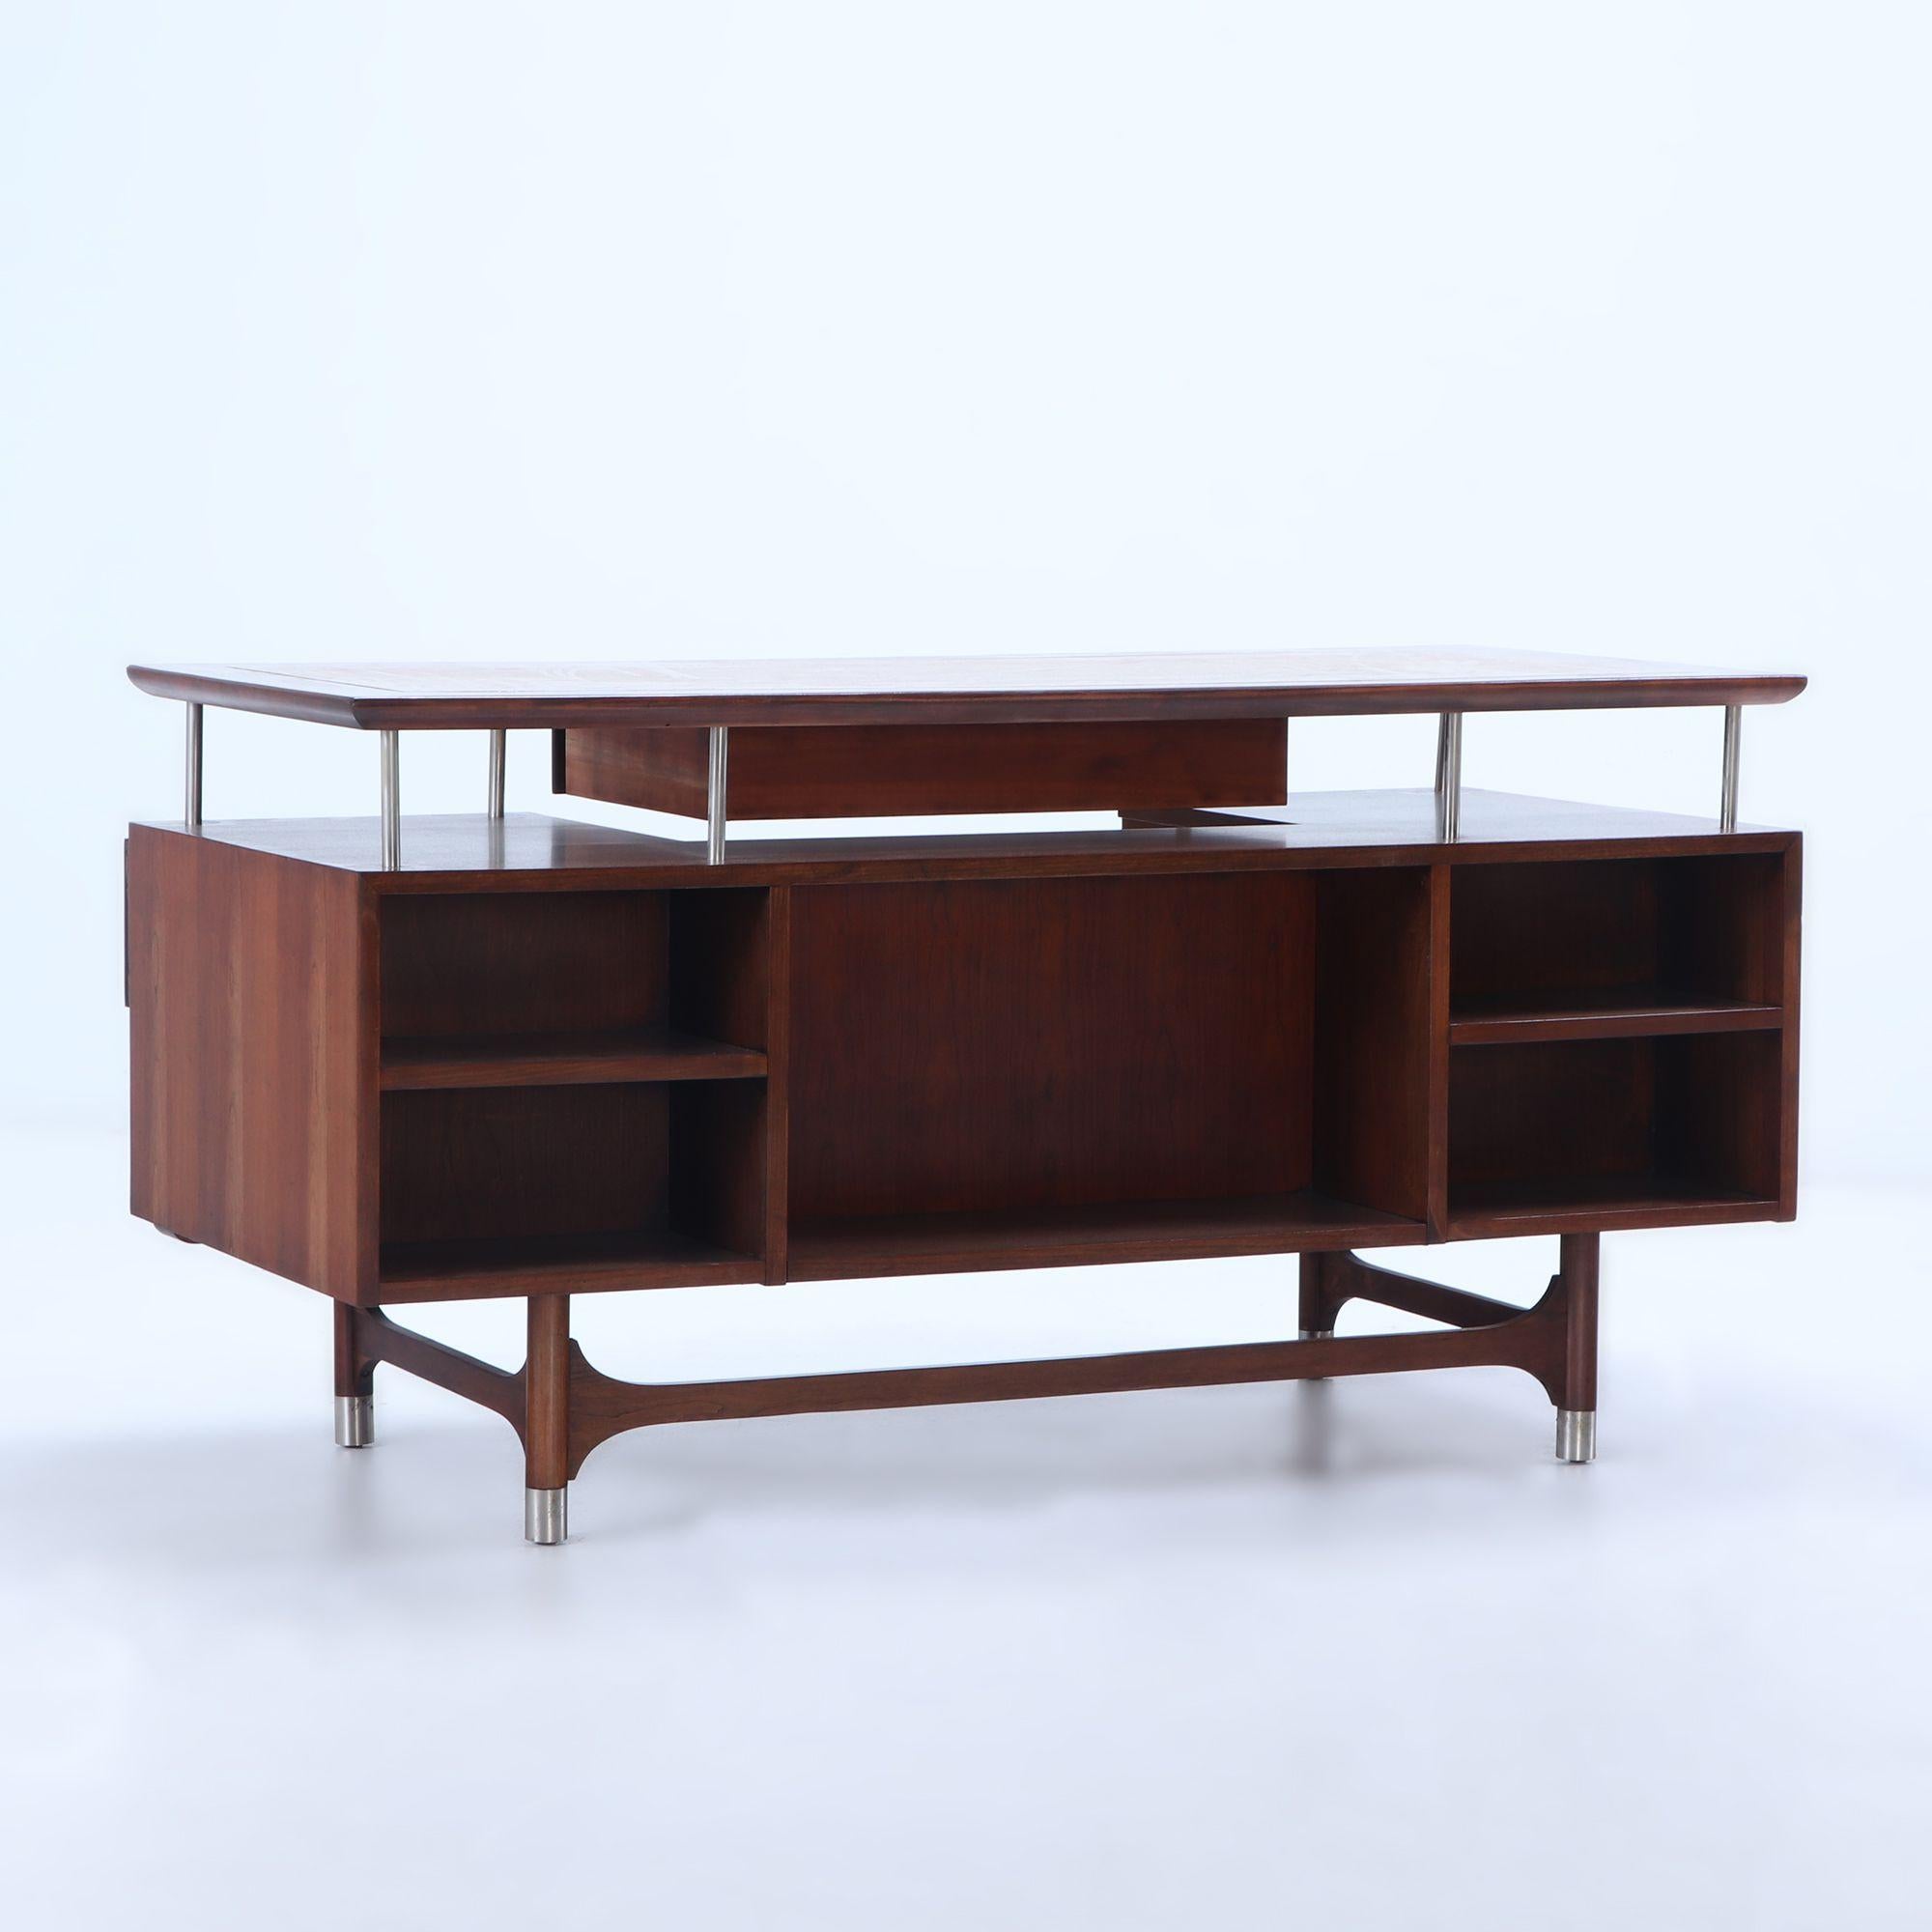 Chrome A Jens Risom mid century modern, double pedestal executive desk in cherry wood